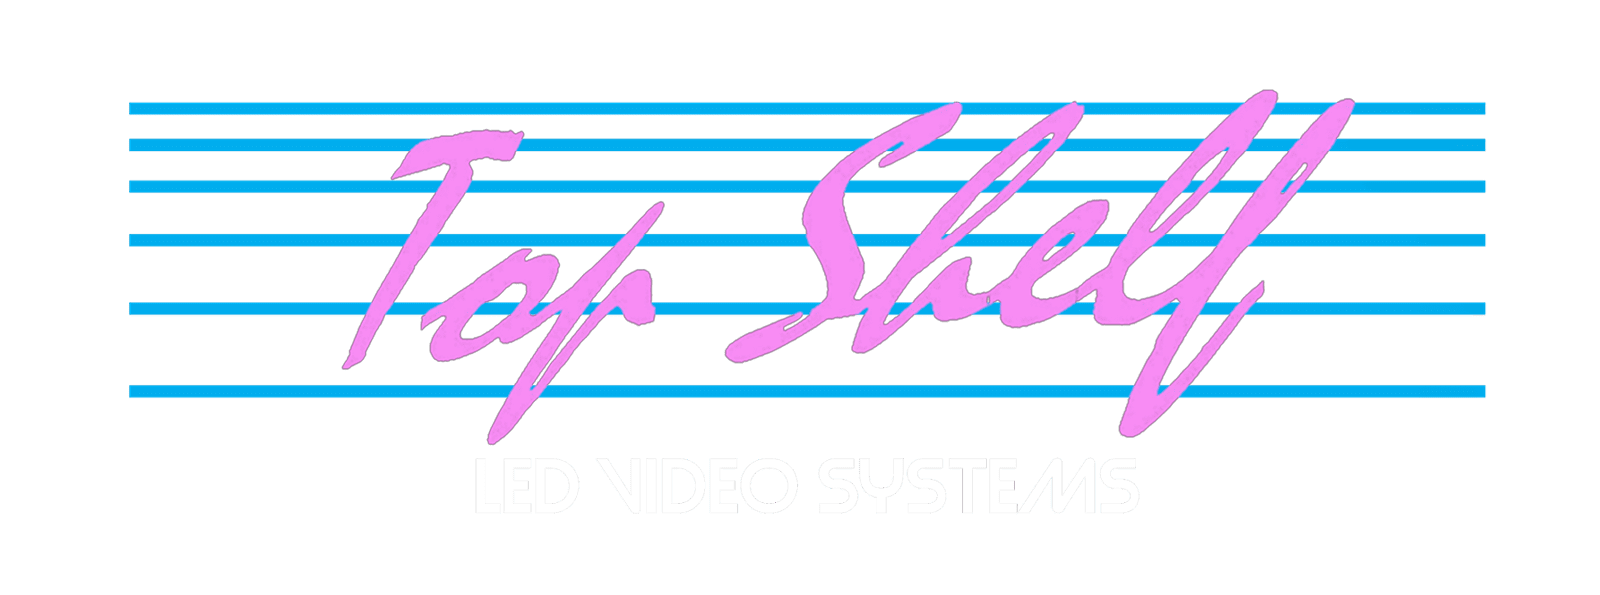 Top Shelf LED Video Systems